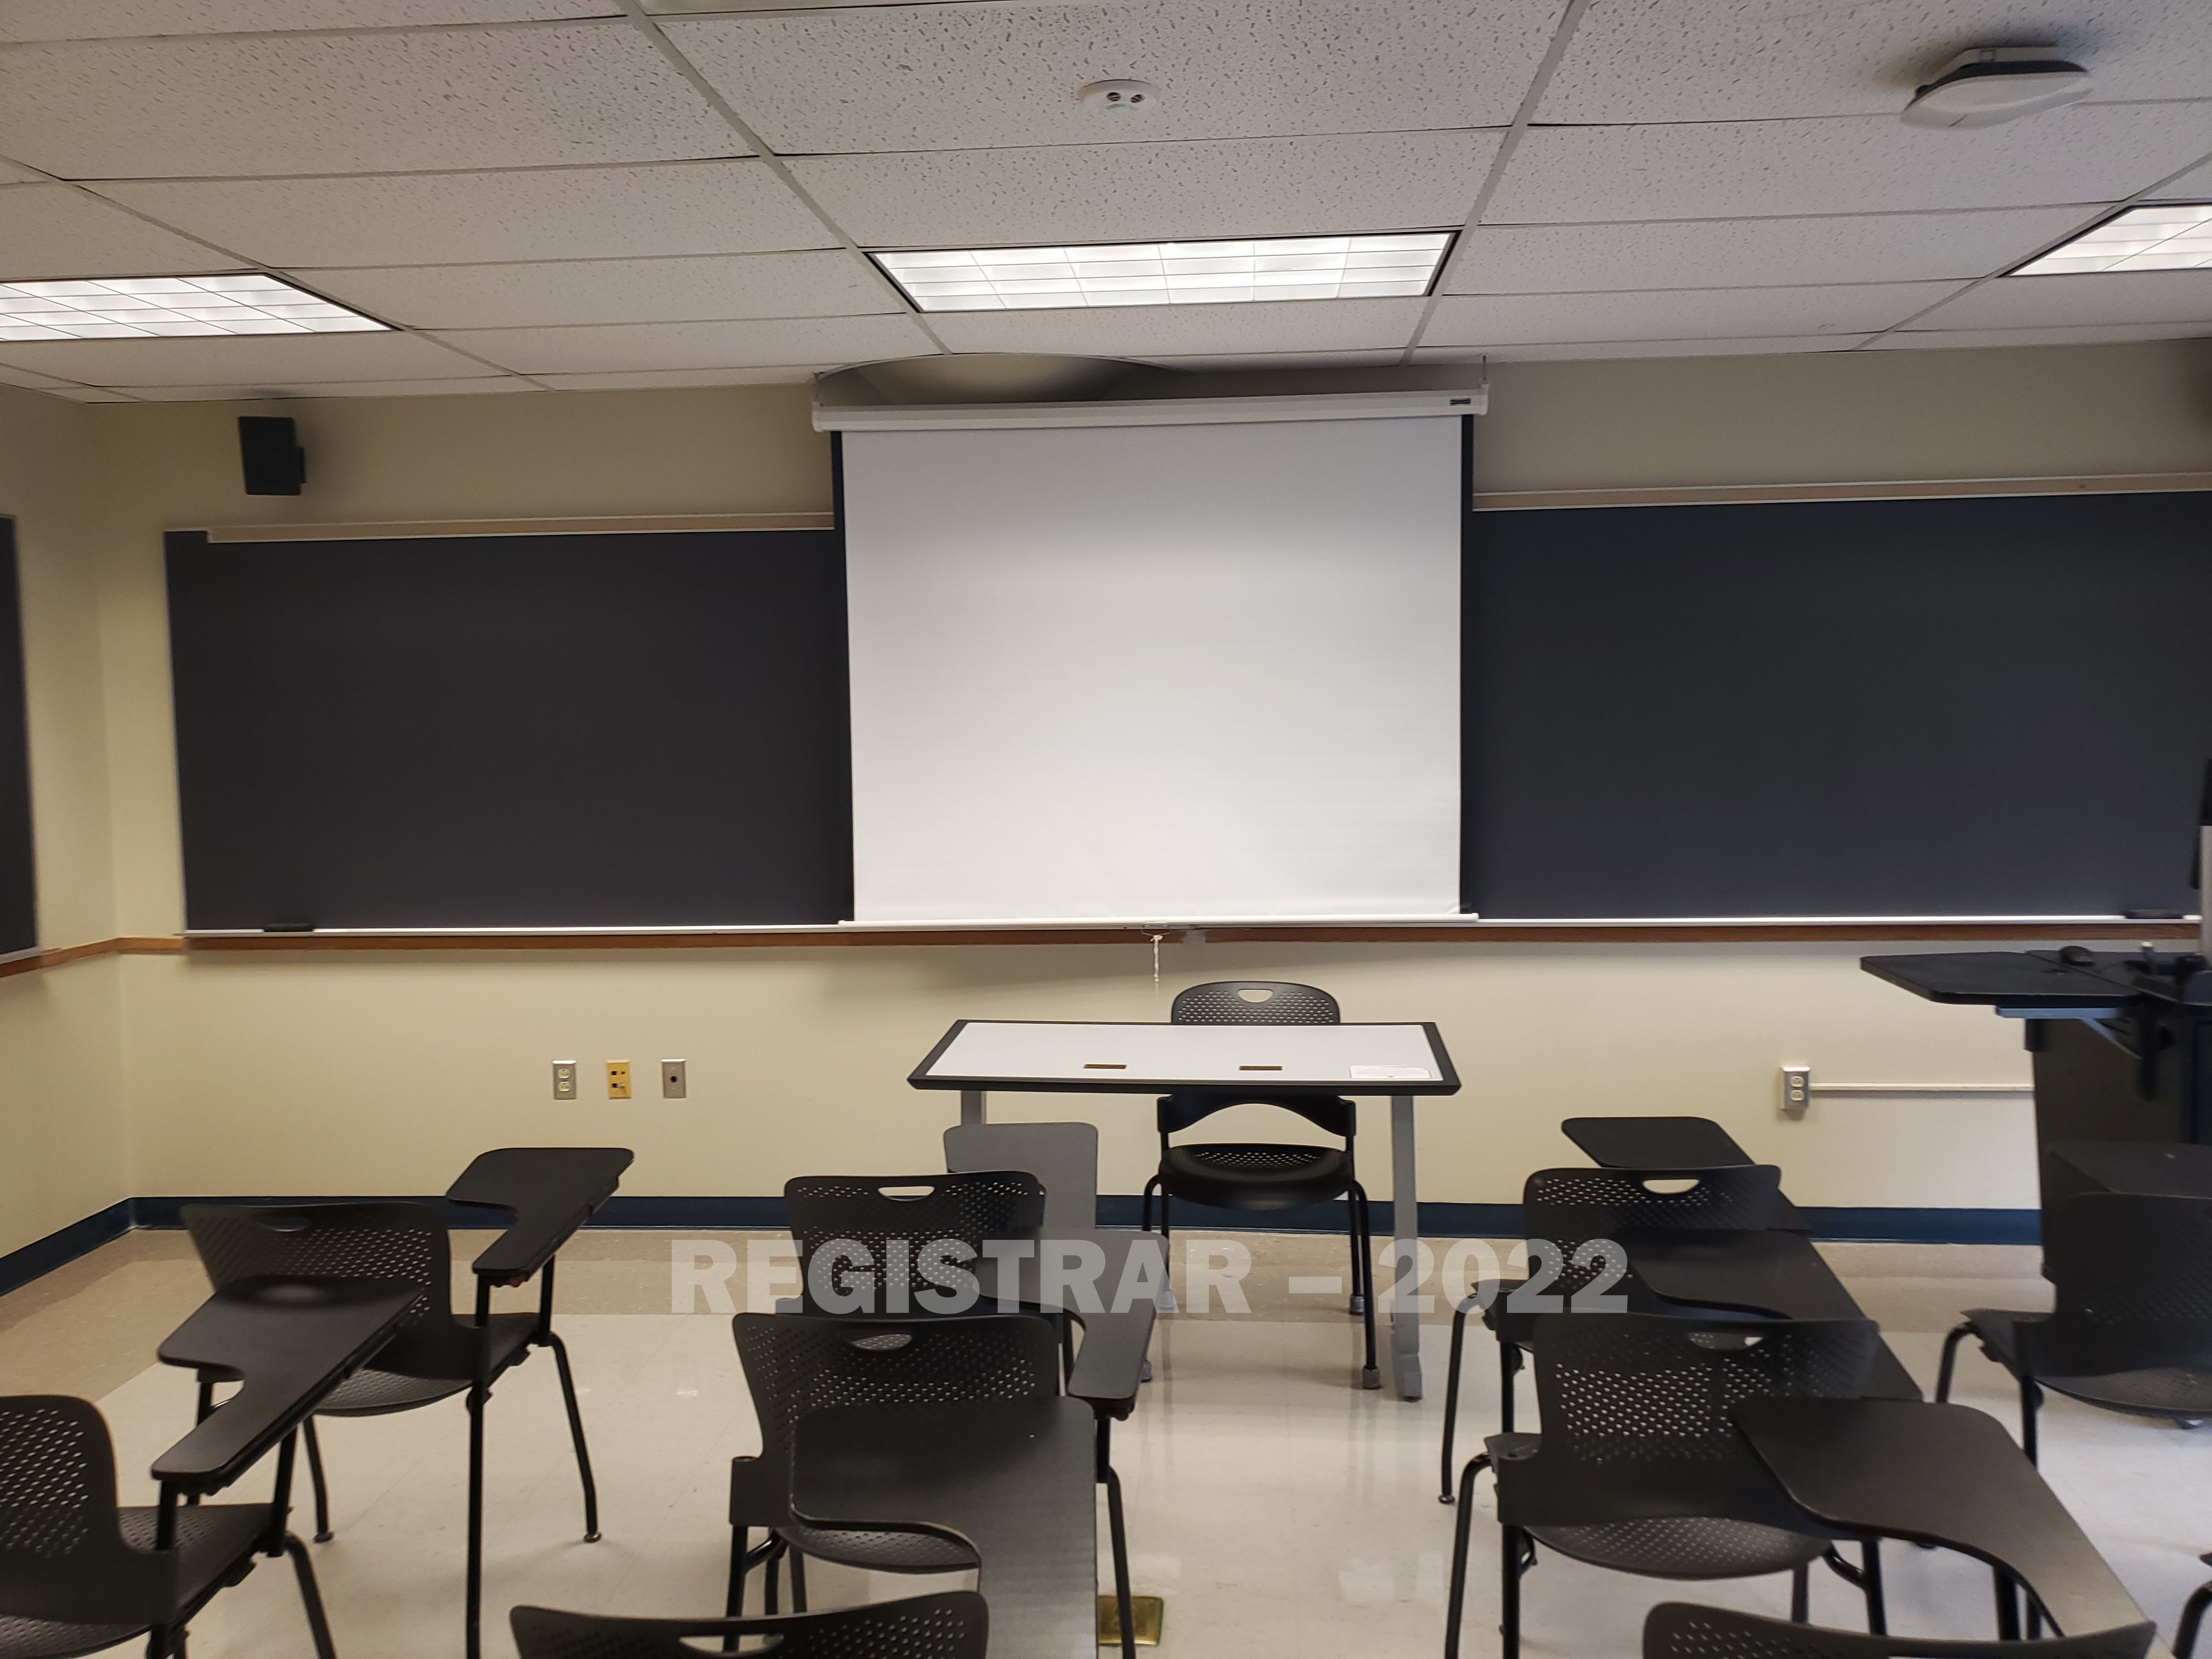 Enarson Classroom Building room 314 view from the back of the room with projector screen down